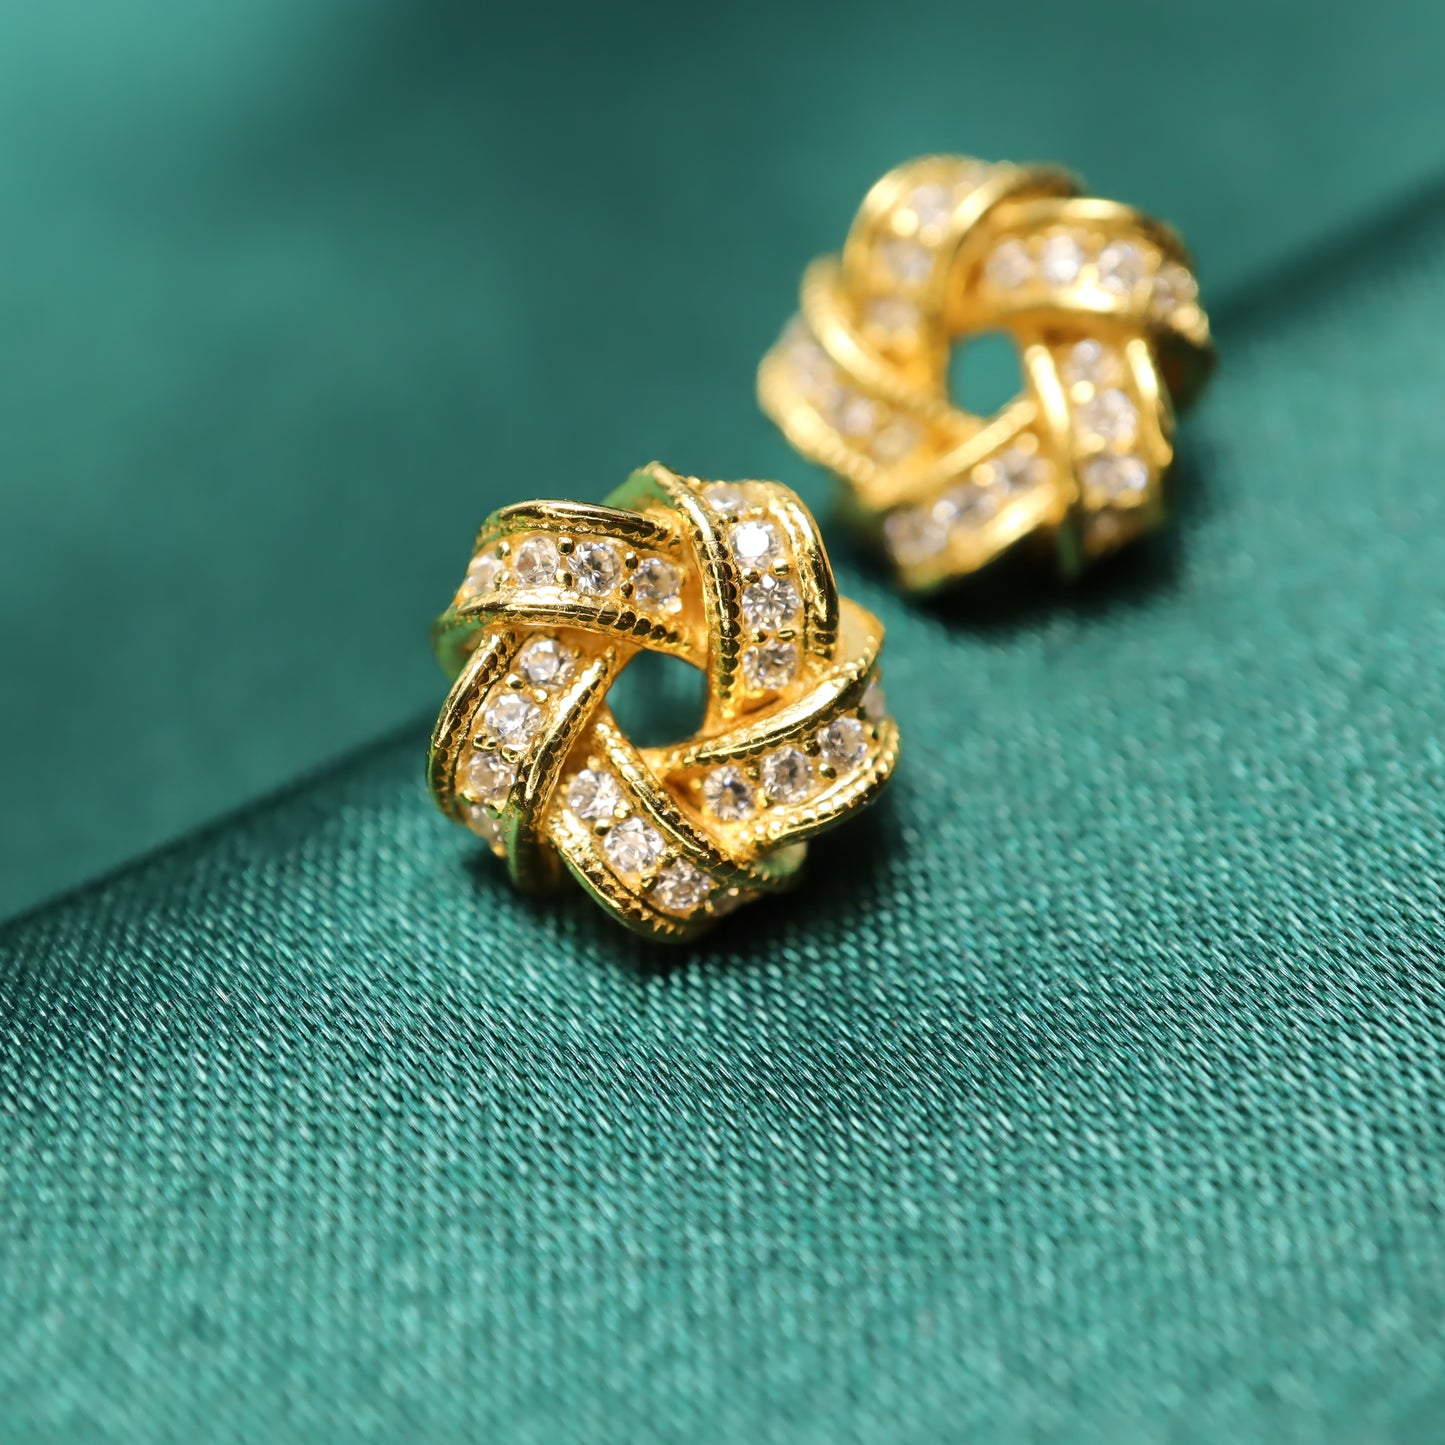 Saṃsāra - S925 Sterling Silver 18K Gold Plated Zircon Stud Earrings (Color: Gold)